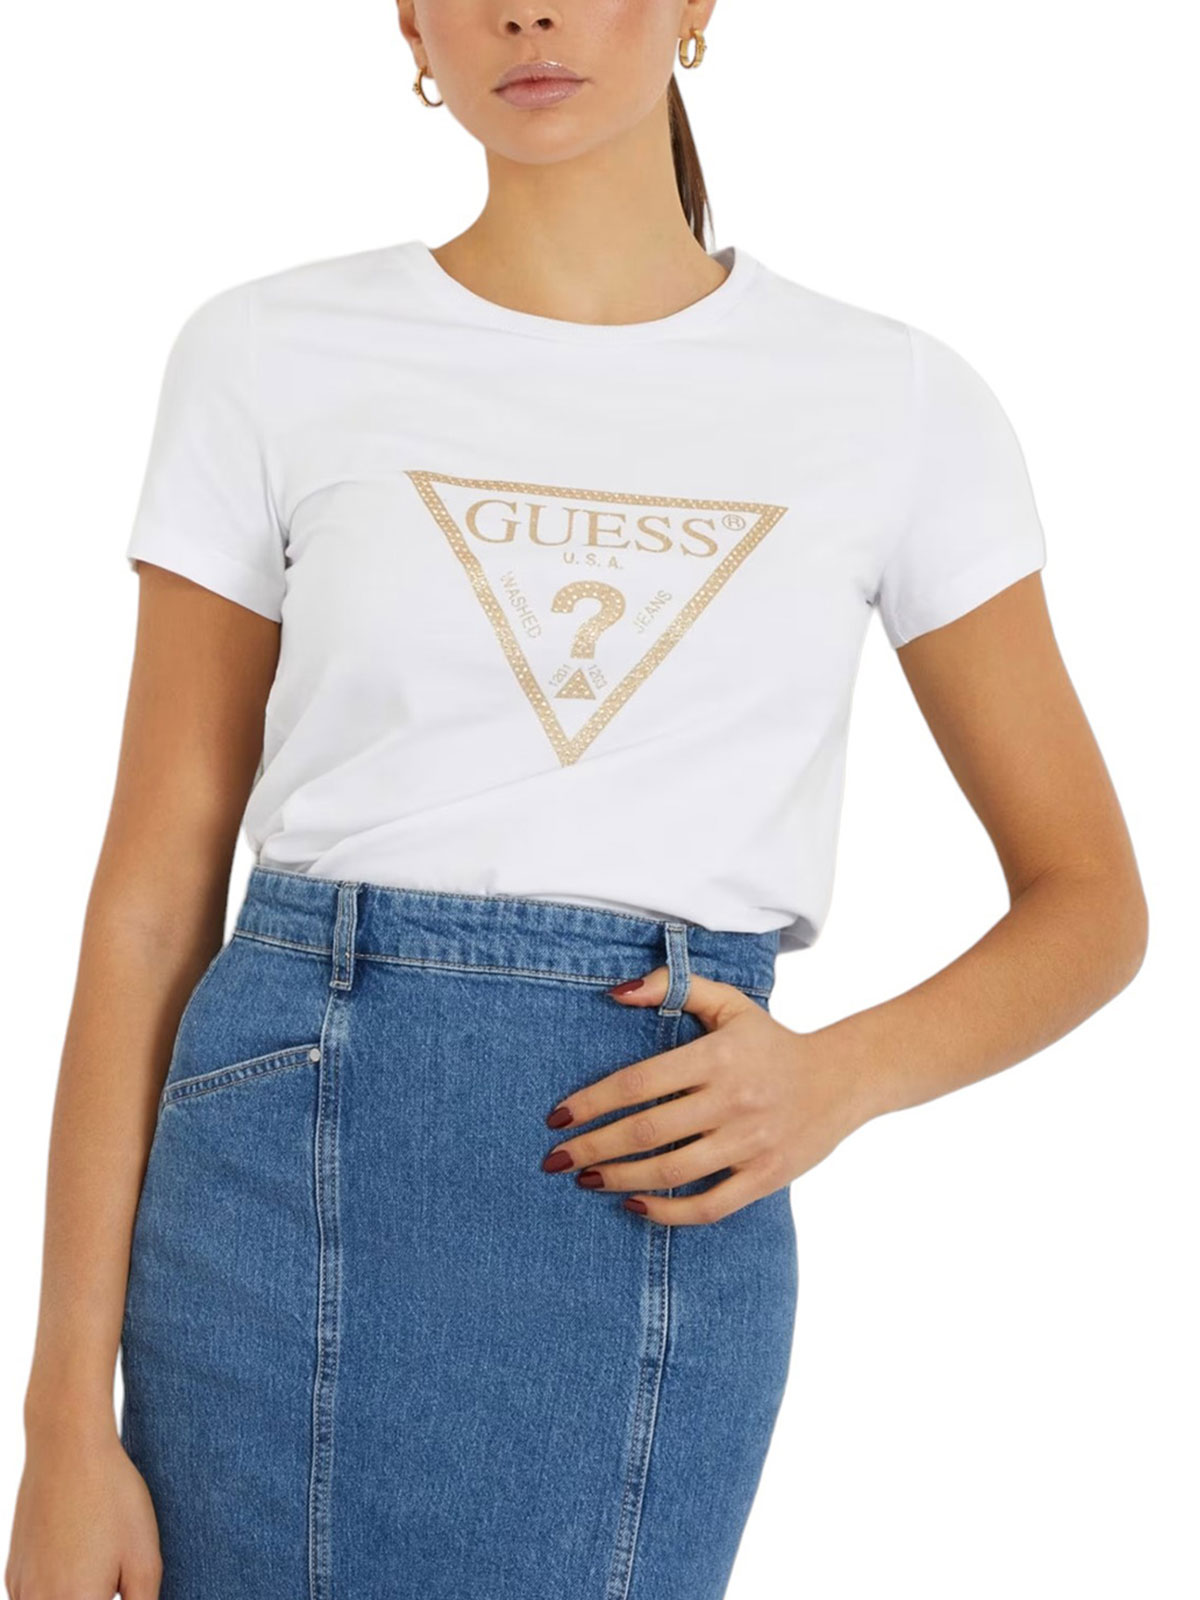   GUESS | Cn Gold Triangle Tee |  